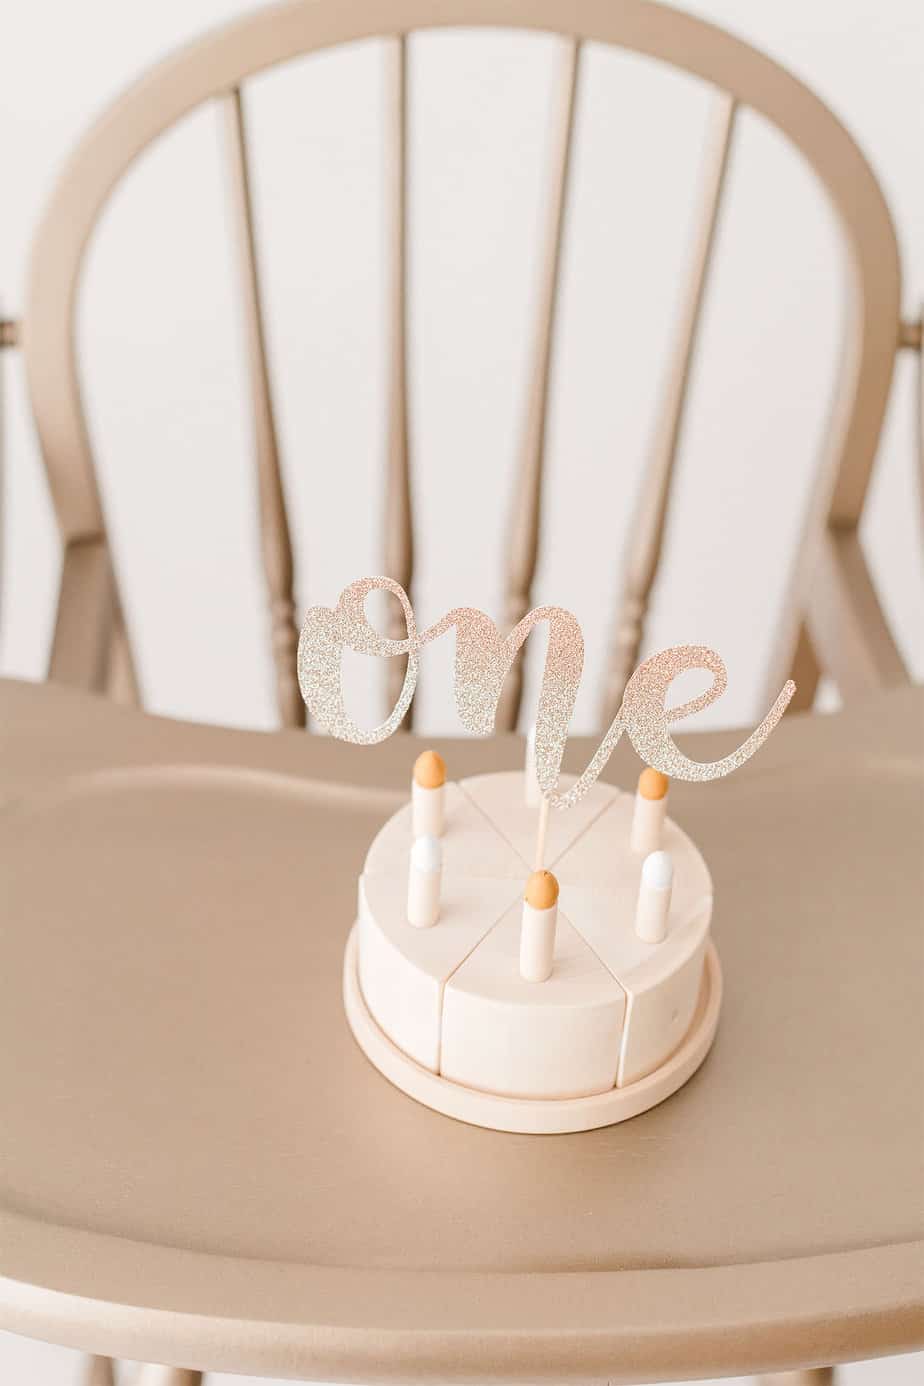 wooden cake for baby photography session in destin